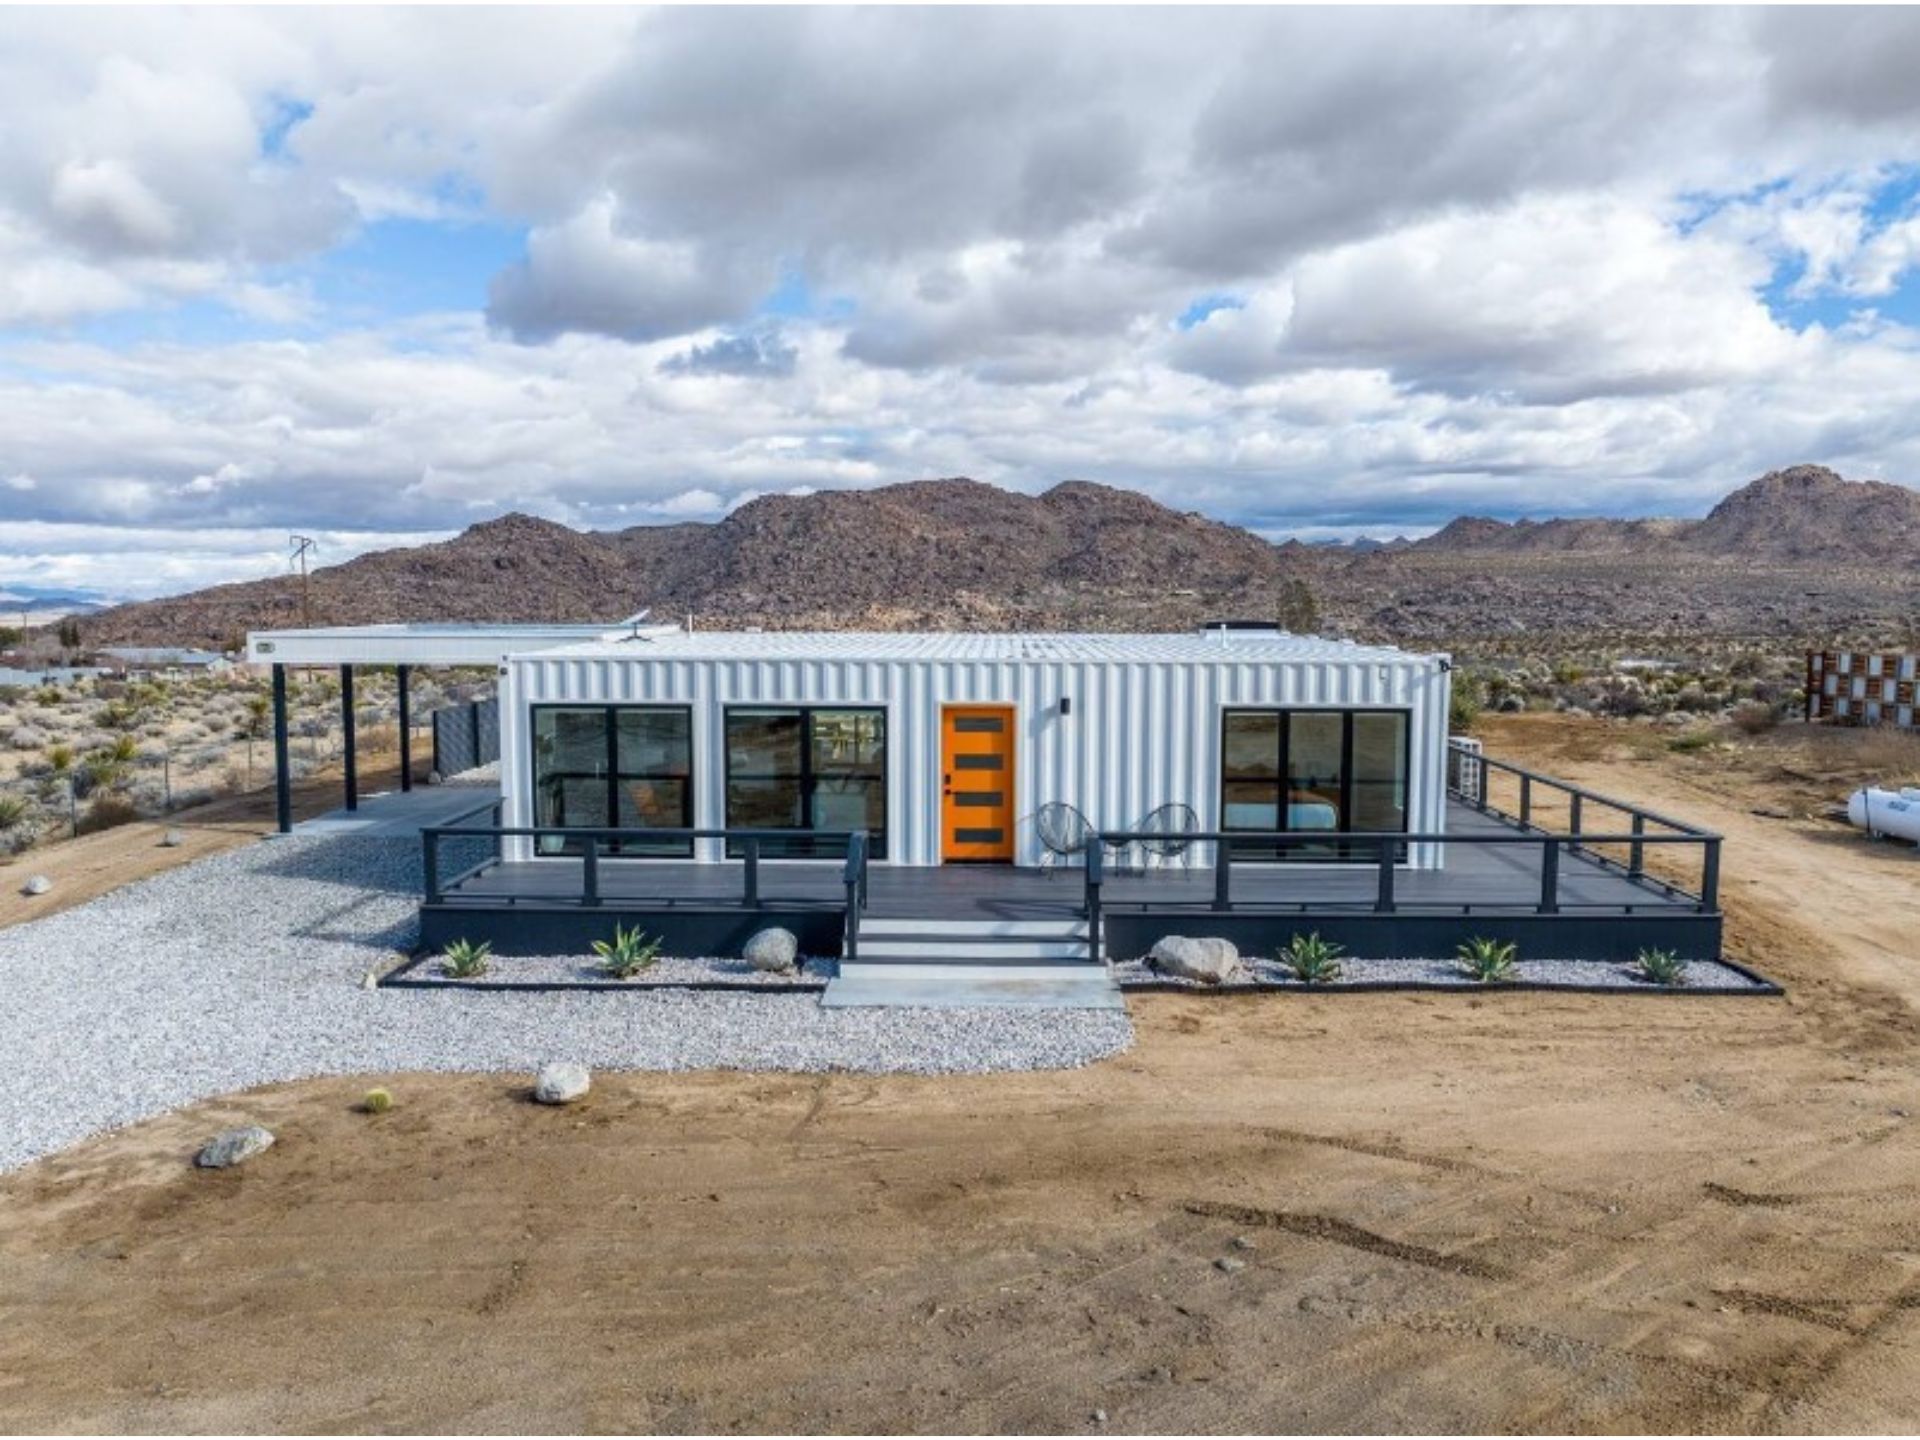 exterior of a shipping container house in the desert